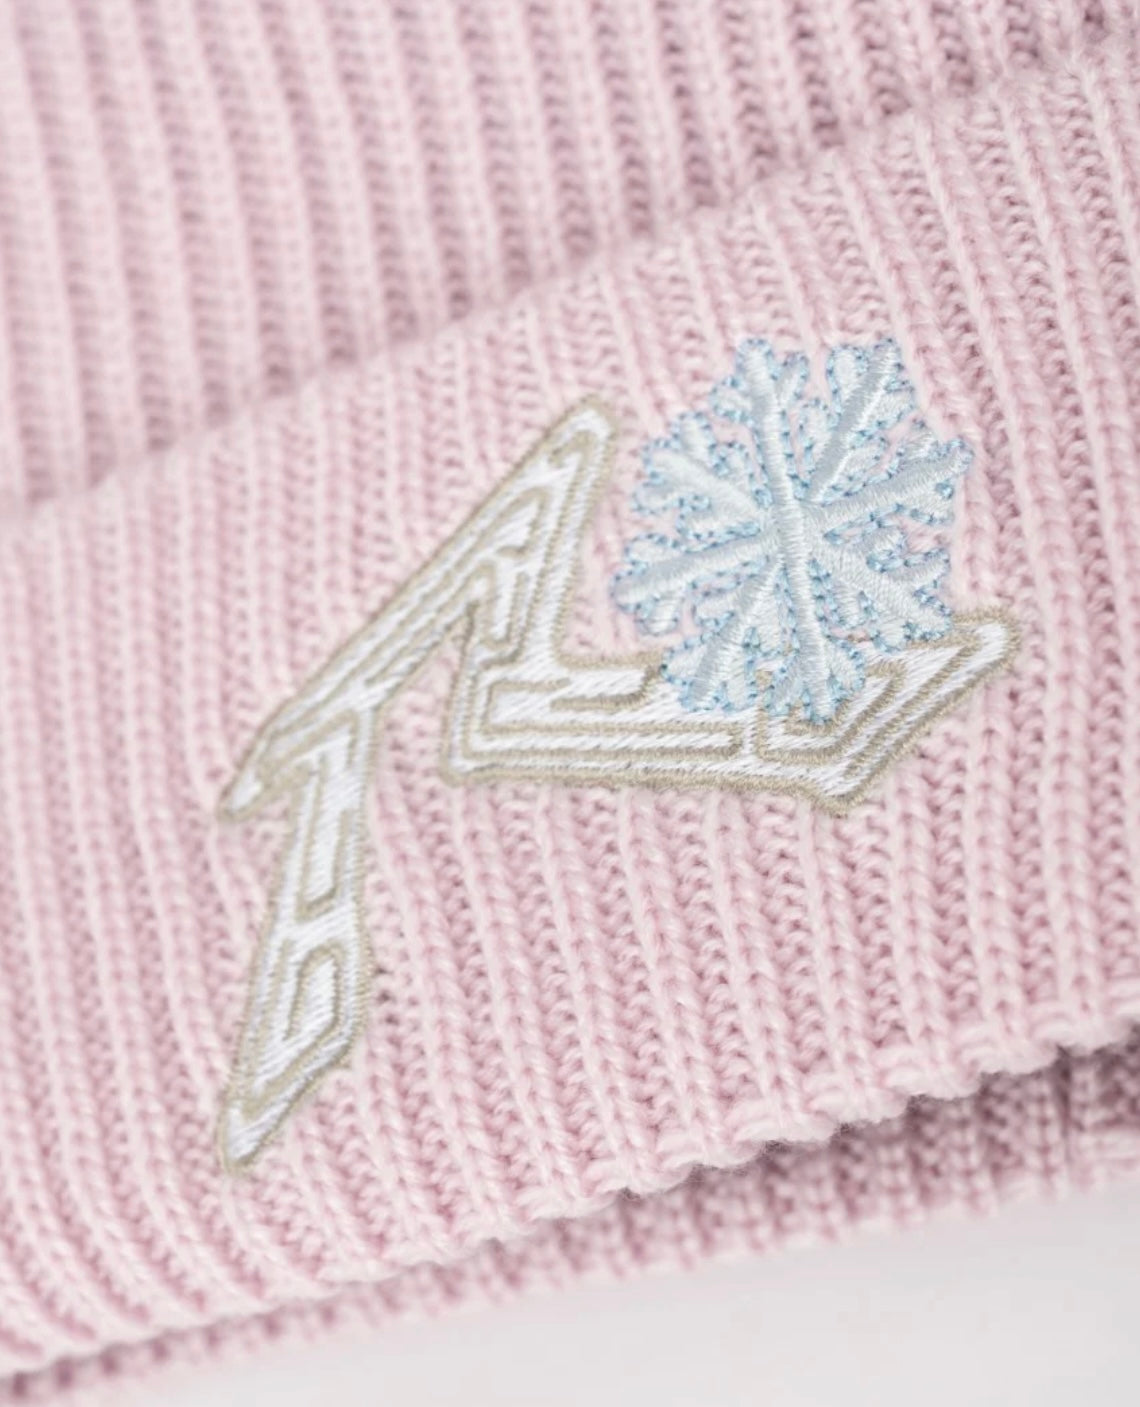 Rusty Icicle Beanie- Soft Orchid